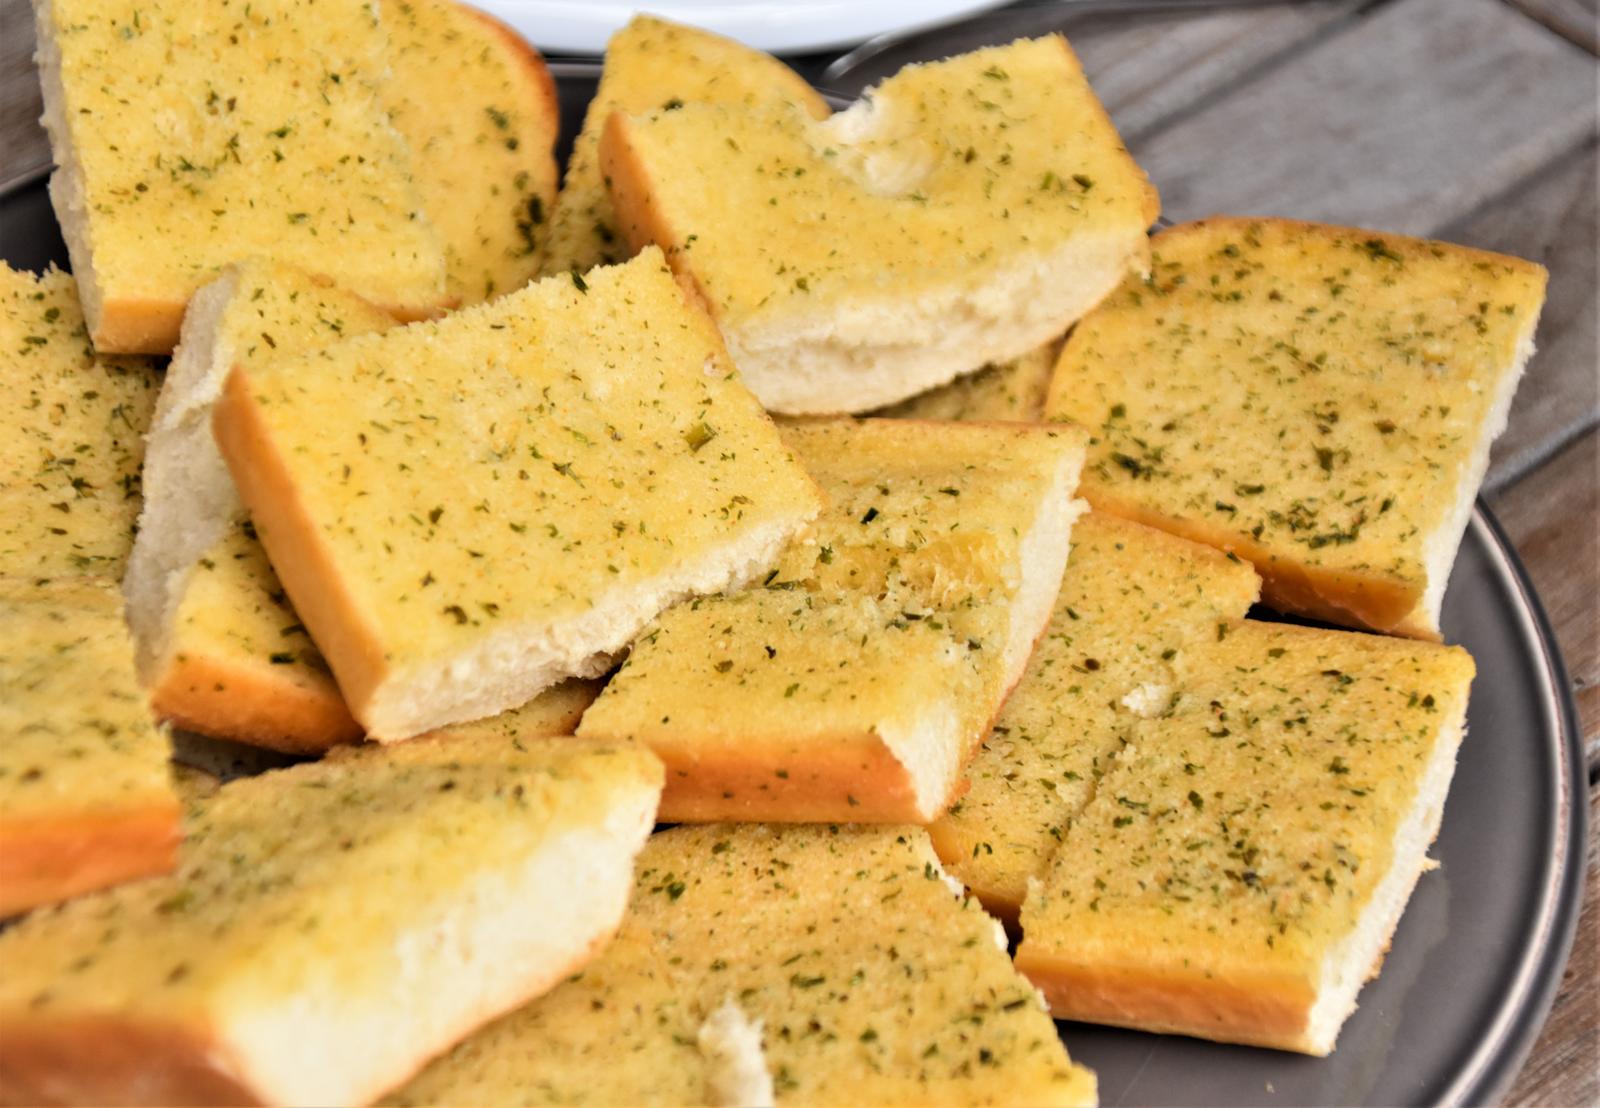 Can We *Actually* Reveal an Accurate Truth About You Purely Based on Your Food Decisions? Garlic bread